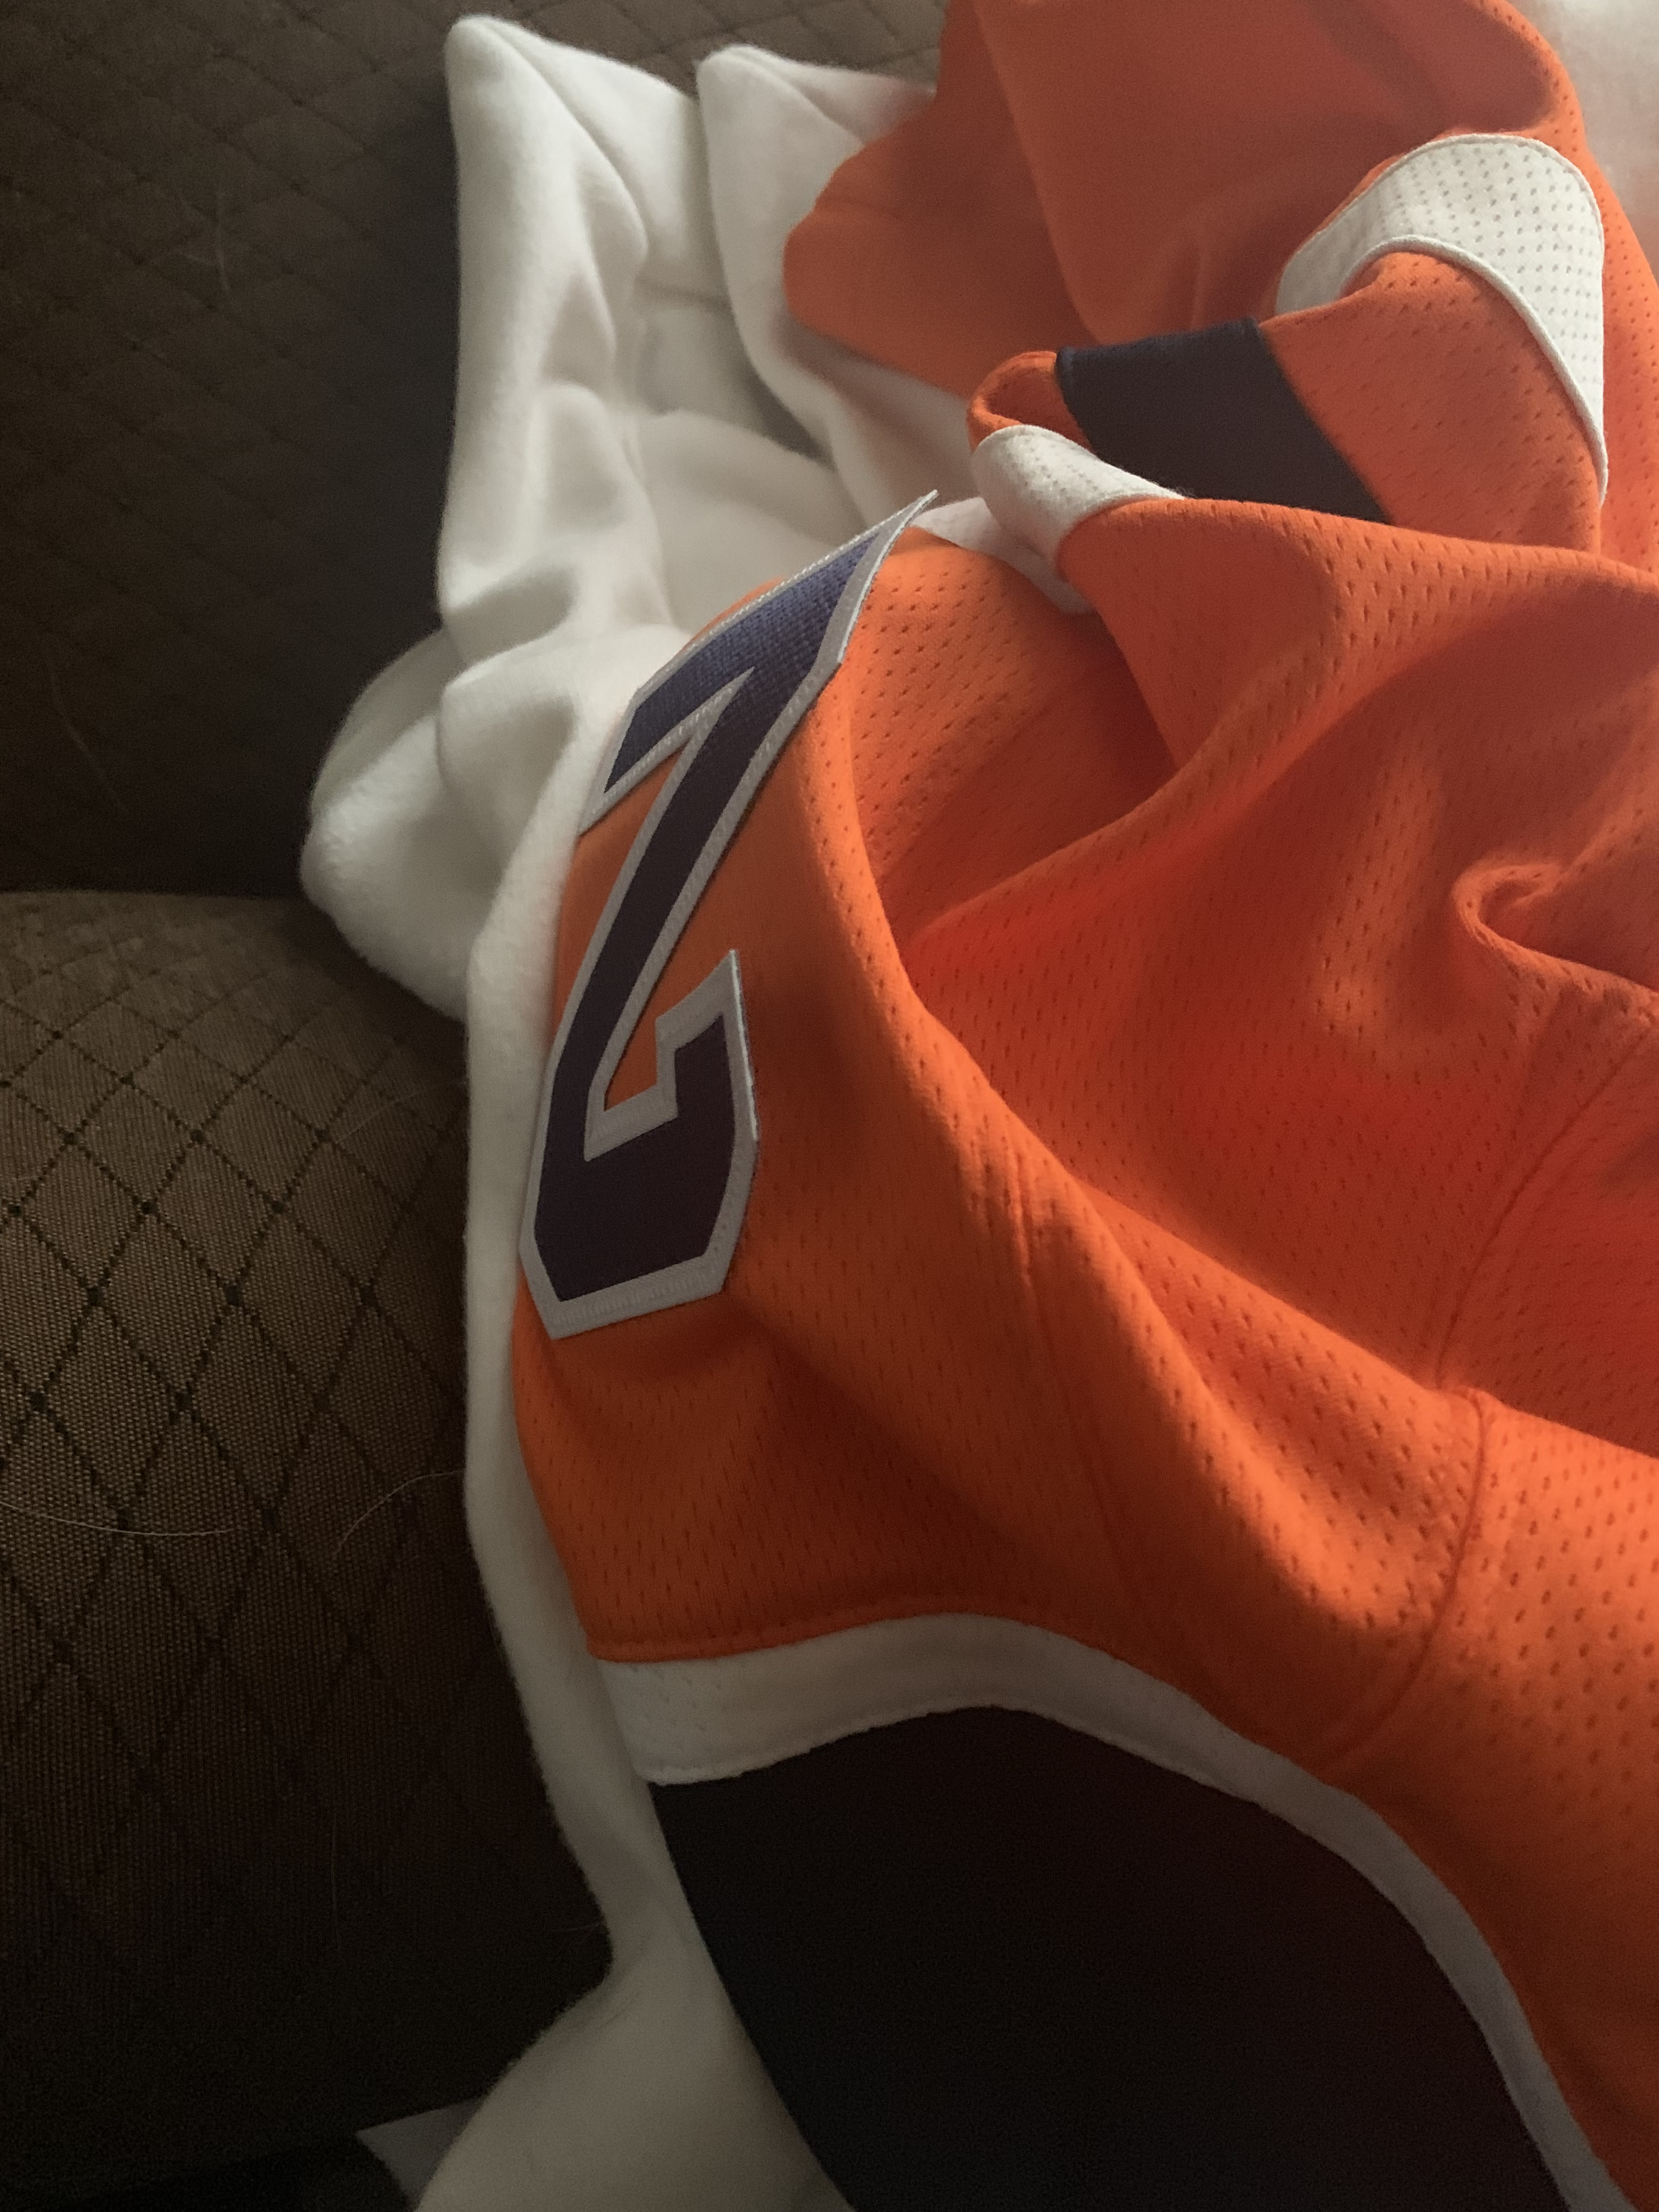 nhl shop jersey review